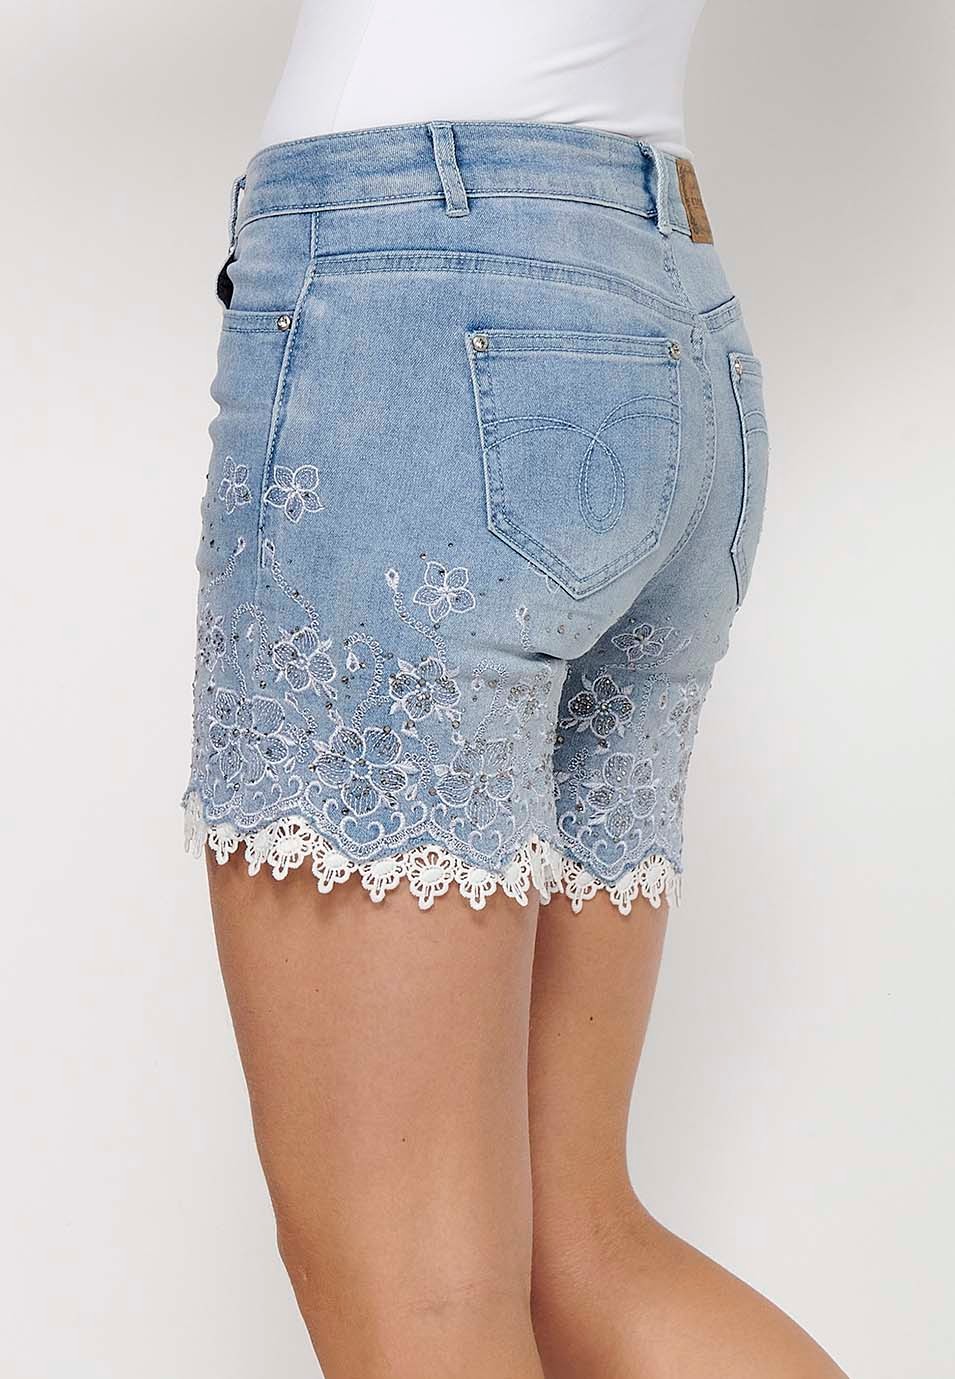 Short denim shorts finished with lace and floral embroidery with front closure with zipper and button with removable bow detail in Blue for Women 8